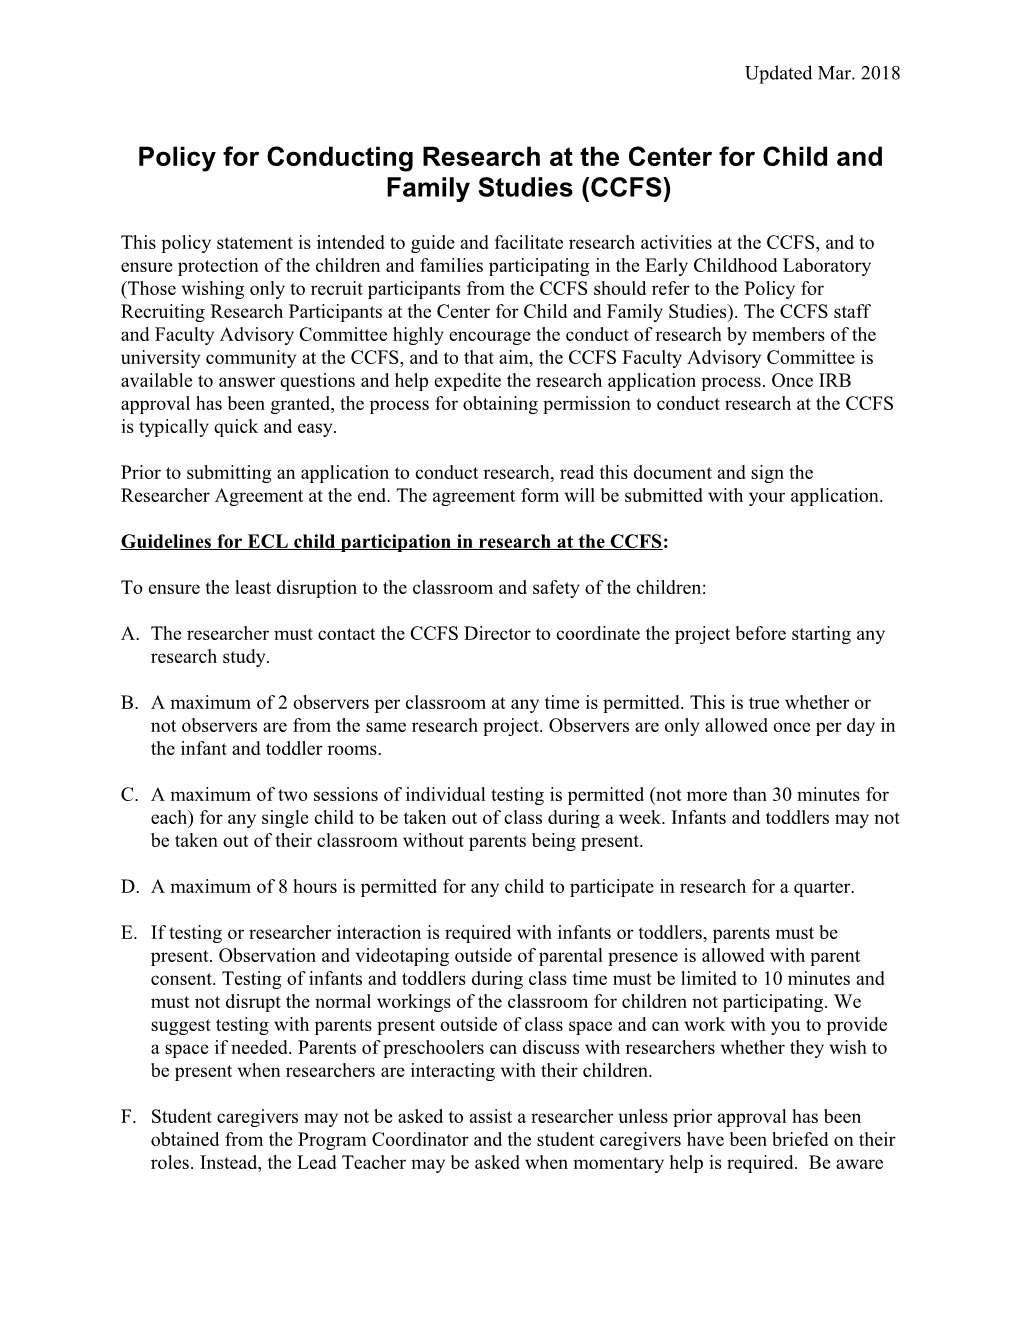 Policy for Conducting Research at the Center for Child and Family Studies (CCFS)